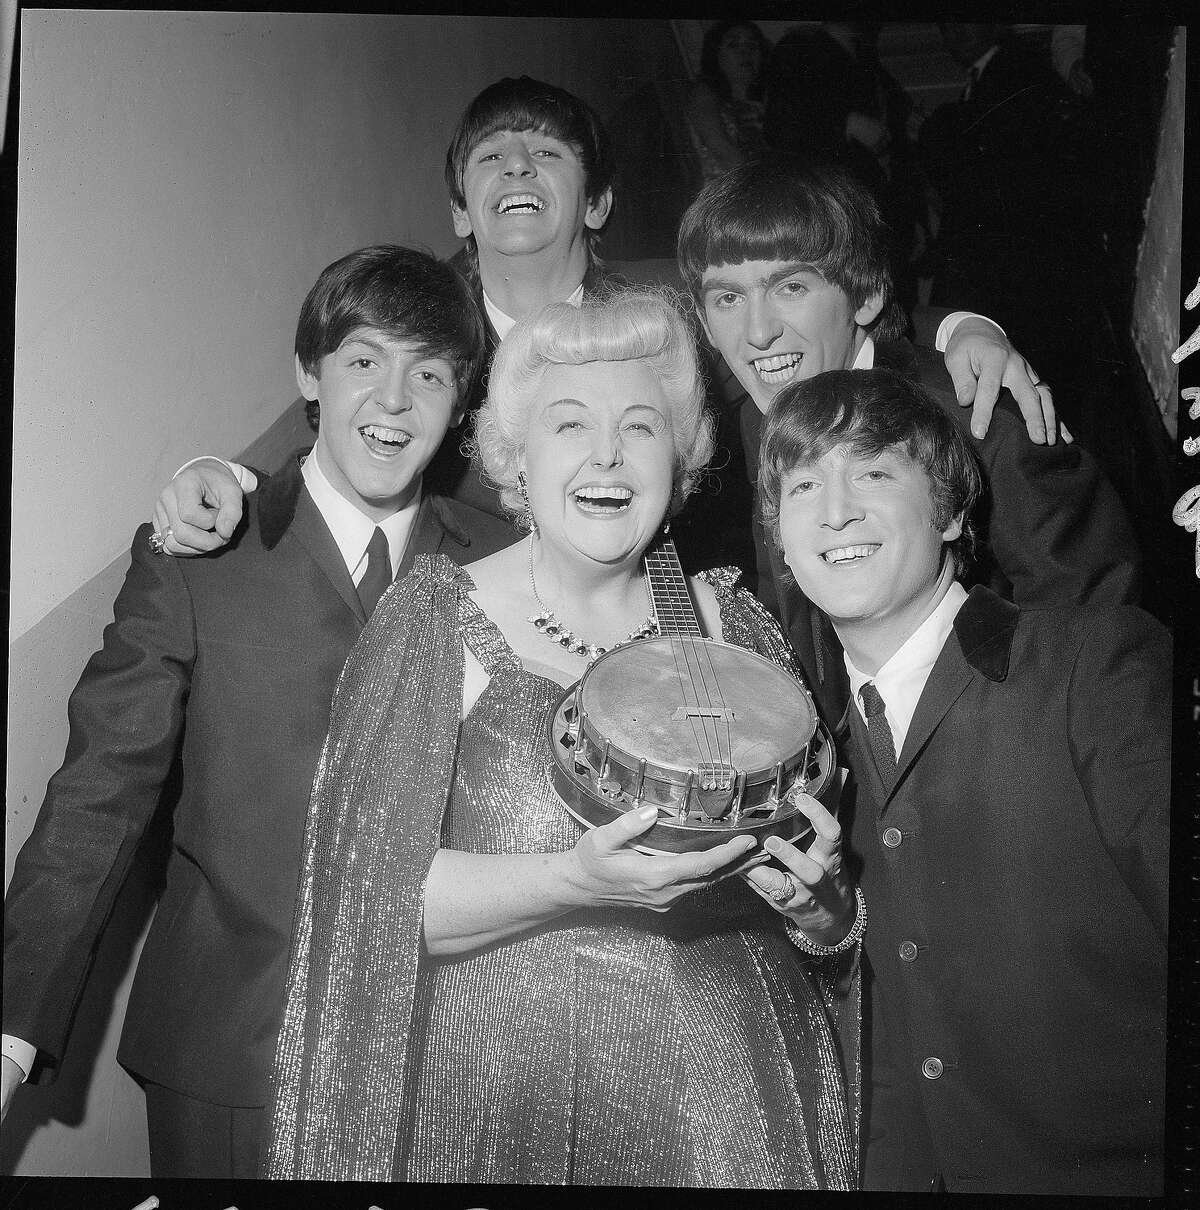 The Beatles take a break backstage with singer and banjo player Tessie O'Shea who is probably best known for the song "Two Ton Tessie from Tennessee," despite being Welsh.